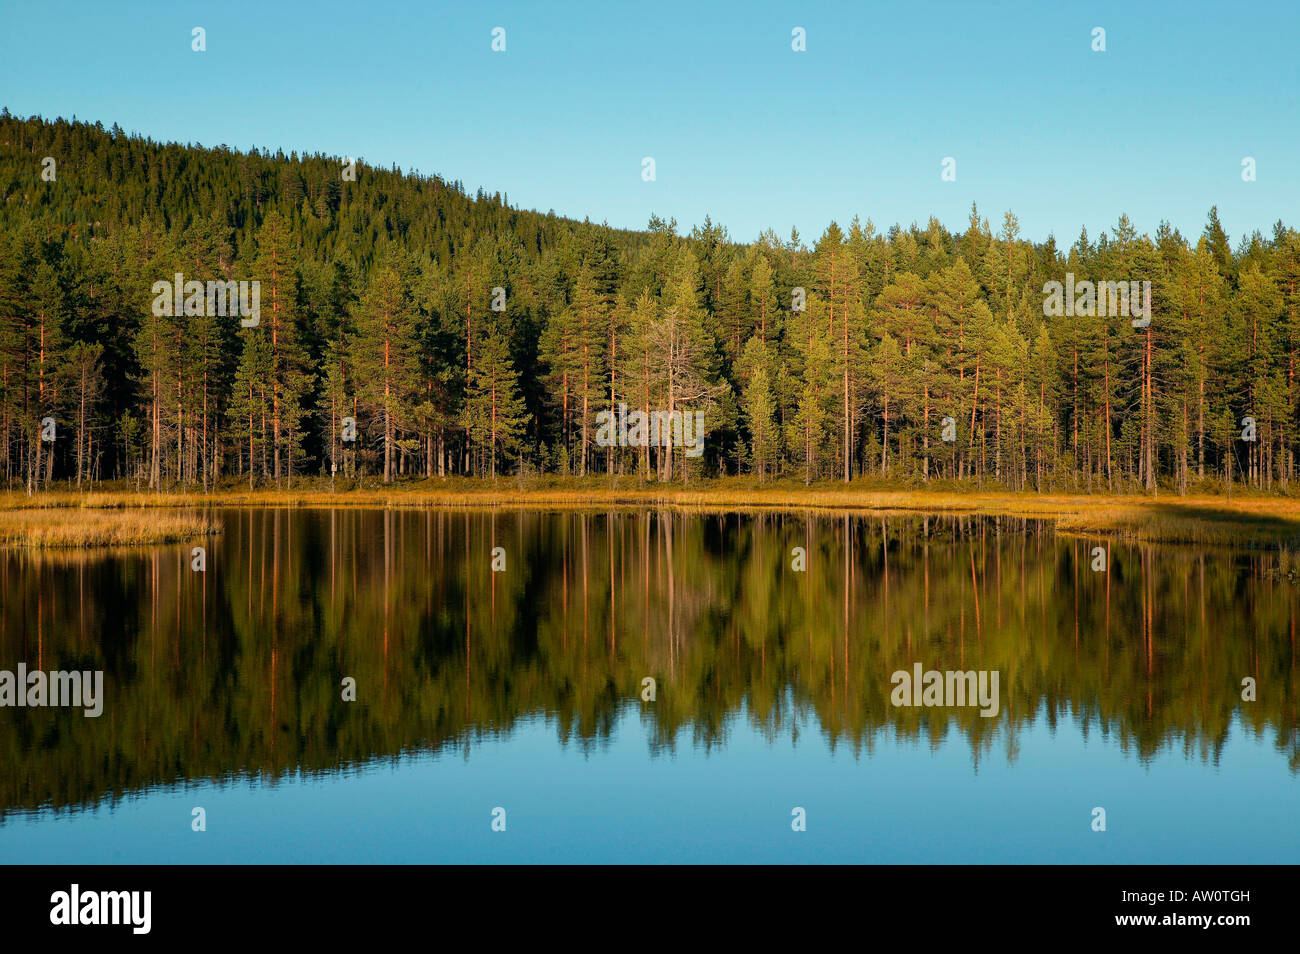 Pine Trees in Swedish Forest, Sweden Stock Photo: 16428352 - Alamy